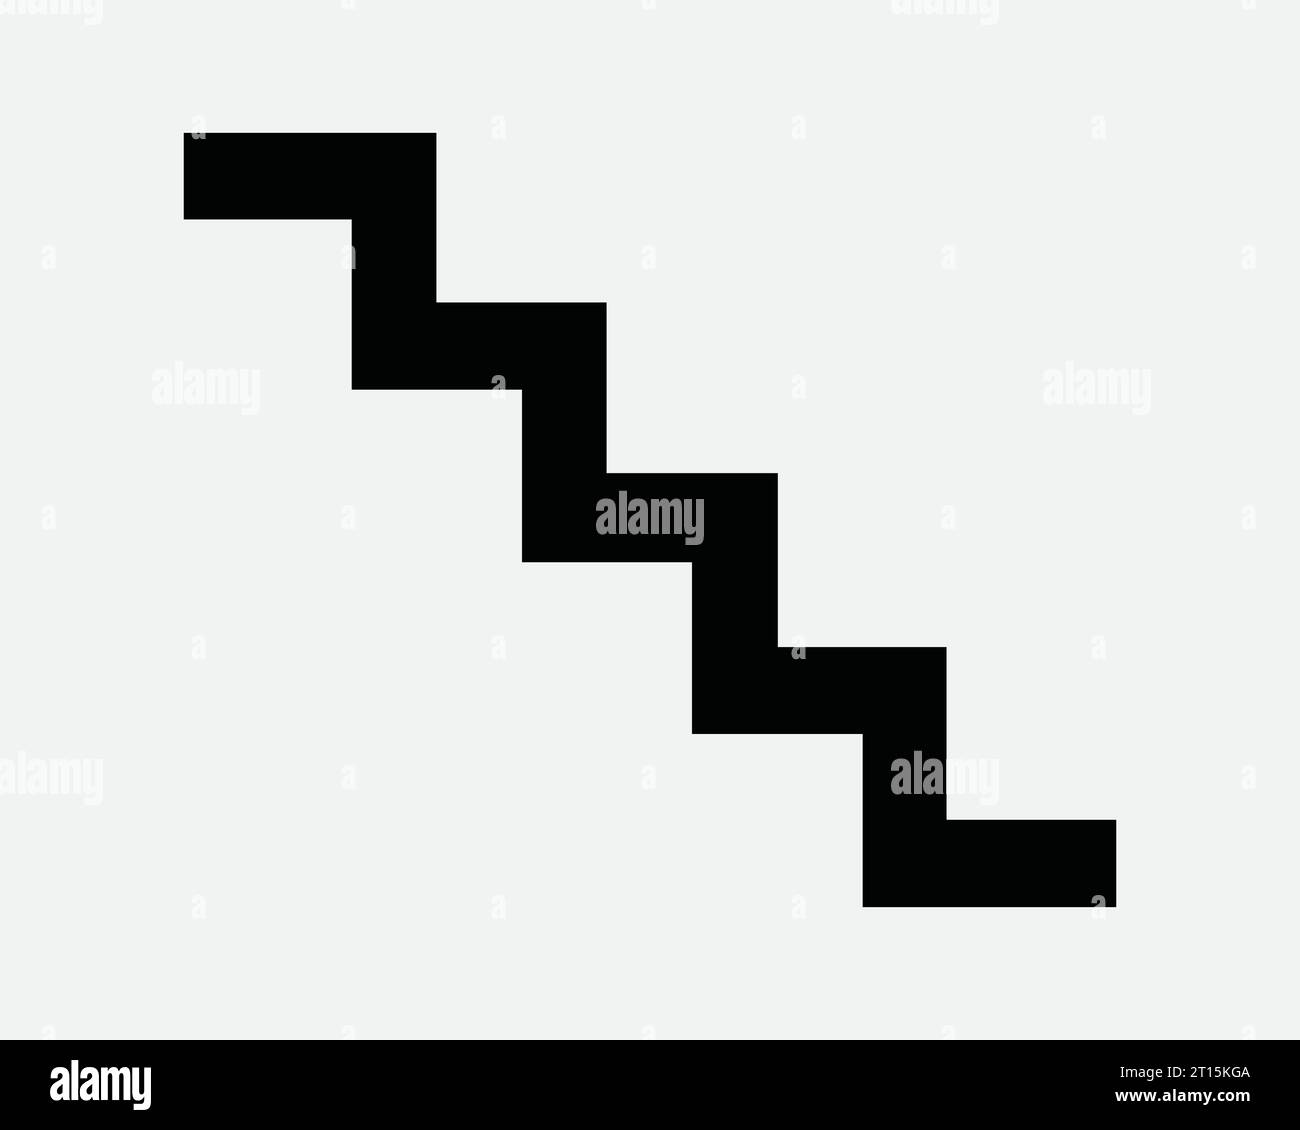 Stairs Icon Staircase Steps Stairwell Up Down Stair Well Case Ladder Walk Climb Escalator Exit Path Black White Outline Line Shape Sign Symbol Vector Stock Vector